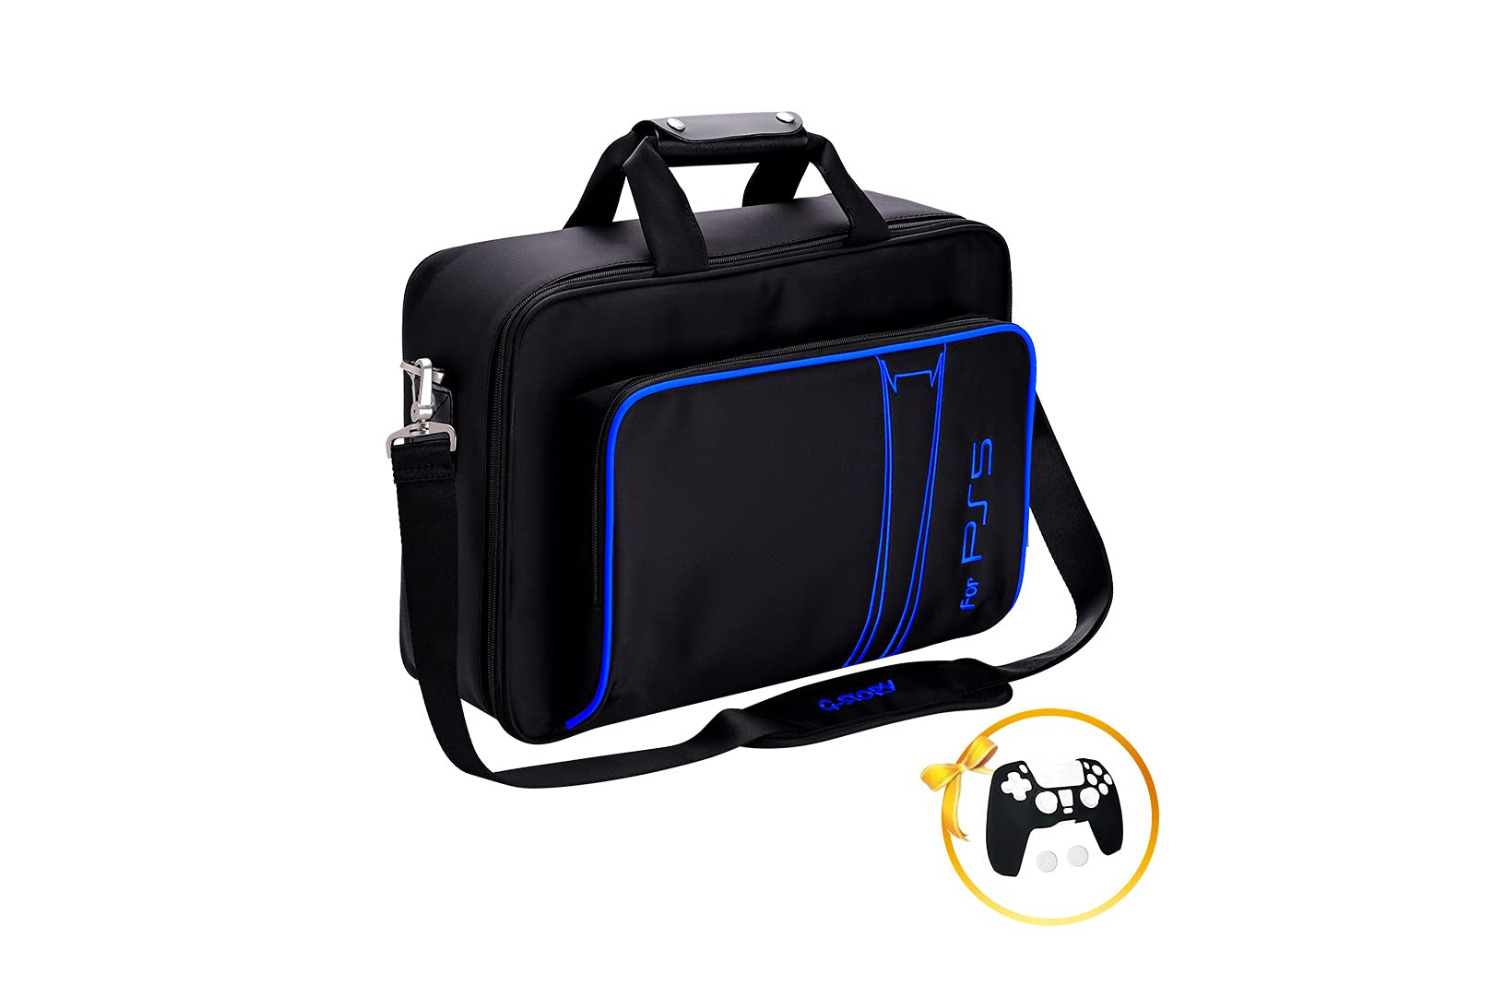 GO-STORY PS5 Travel Case